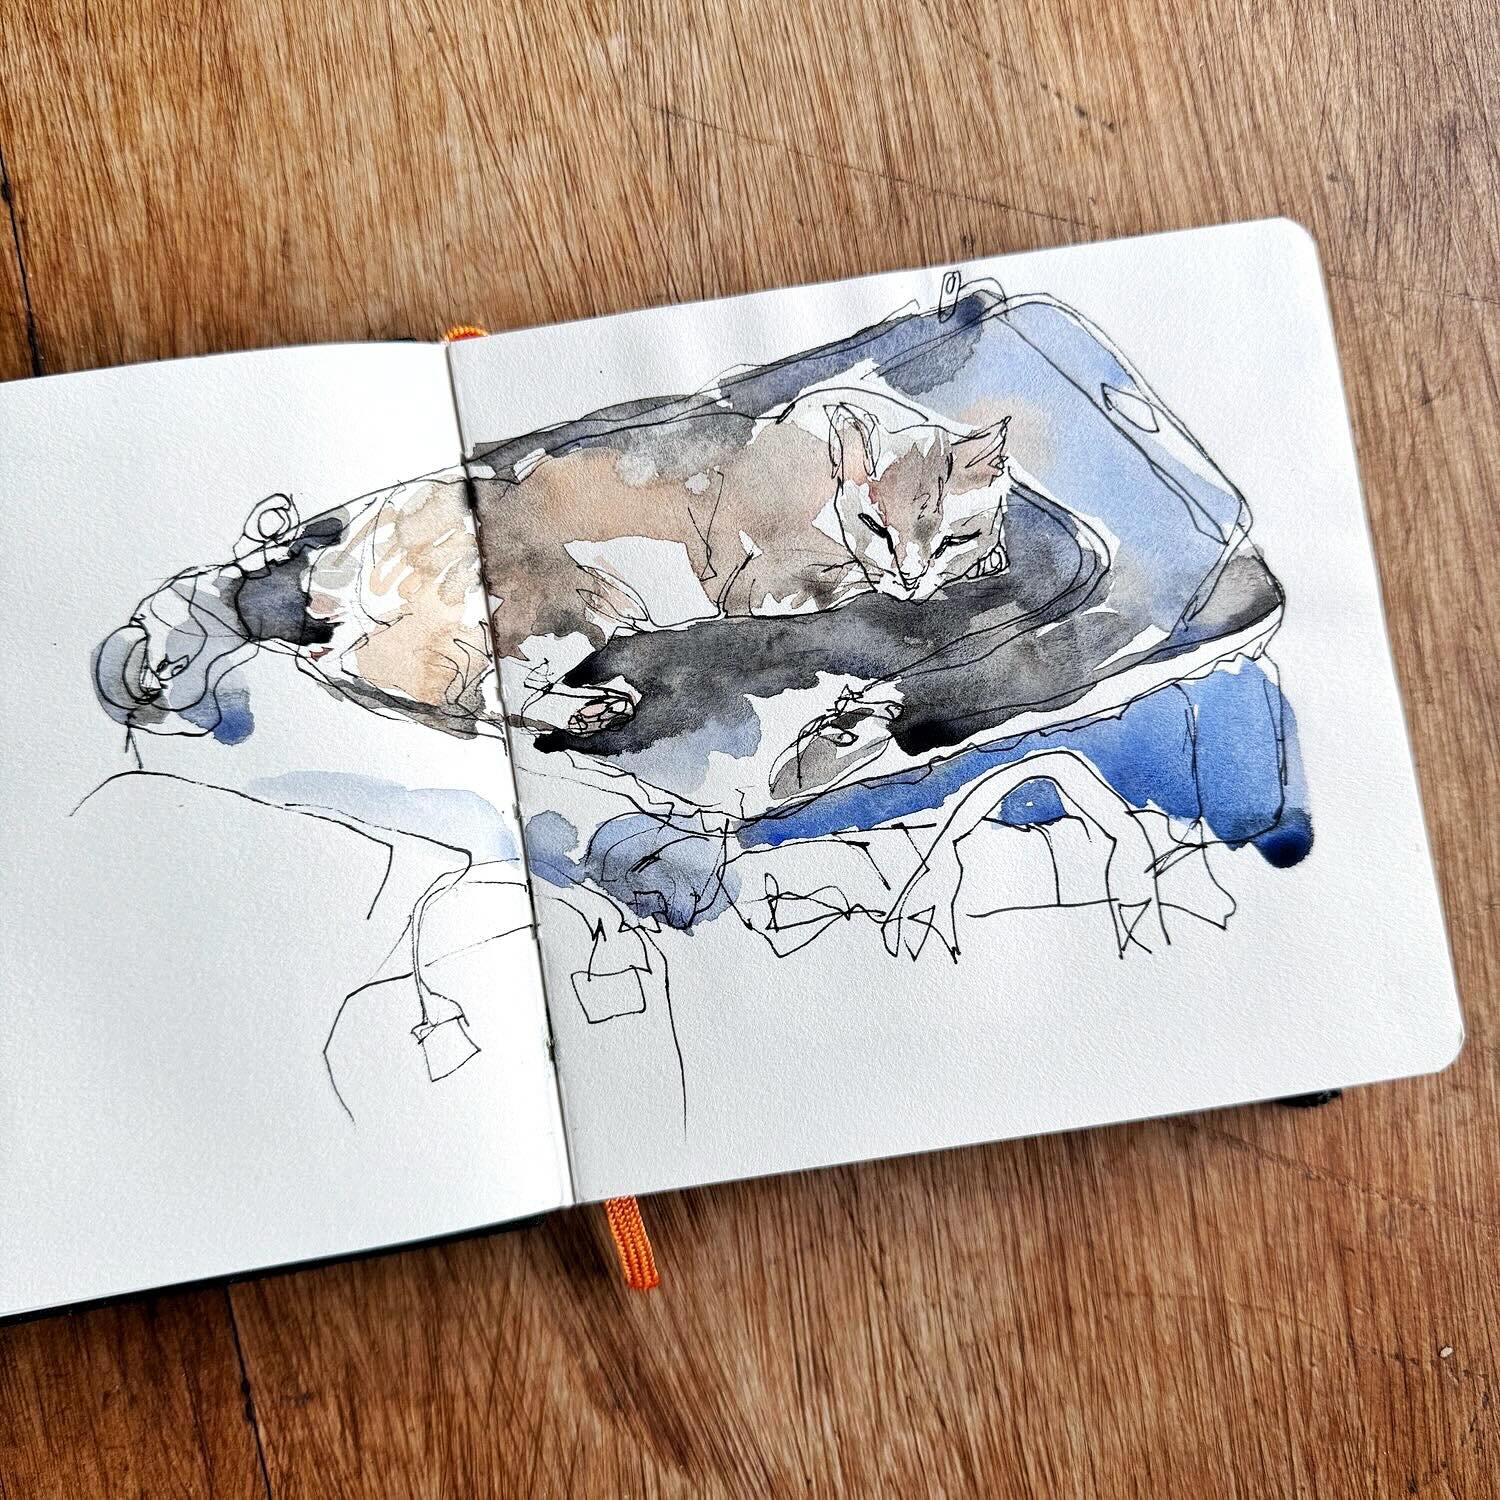 Can&rsquo;t believe March is just about over. Trying to capture small moments before this year flies by. This one reminds me that cats are easier to sketch than preschoolers. 

Learn to #sketchyourlife at my workshop next week, Sunday 4/7 from 10am t